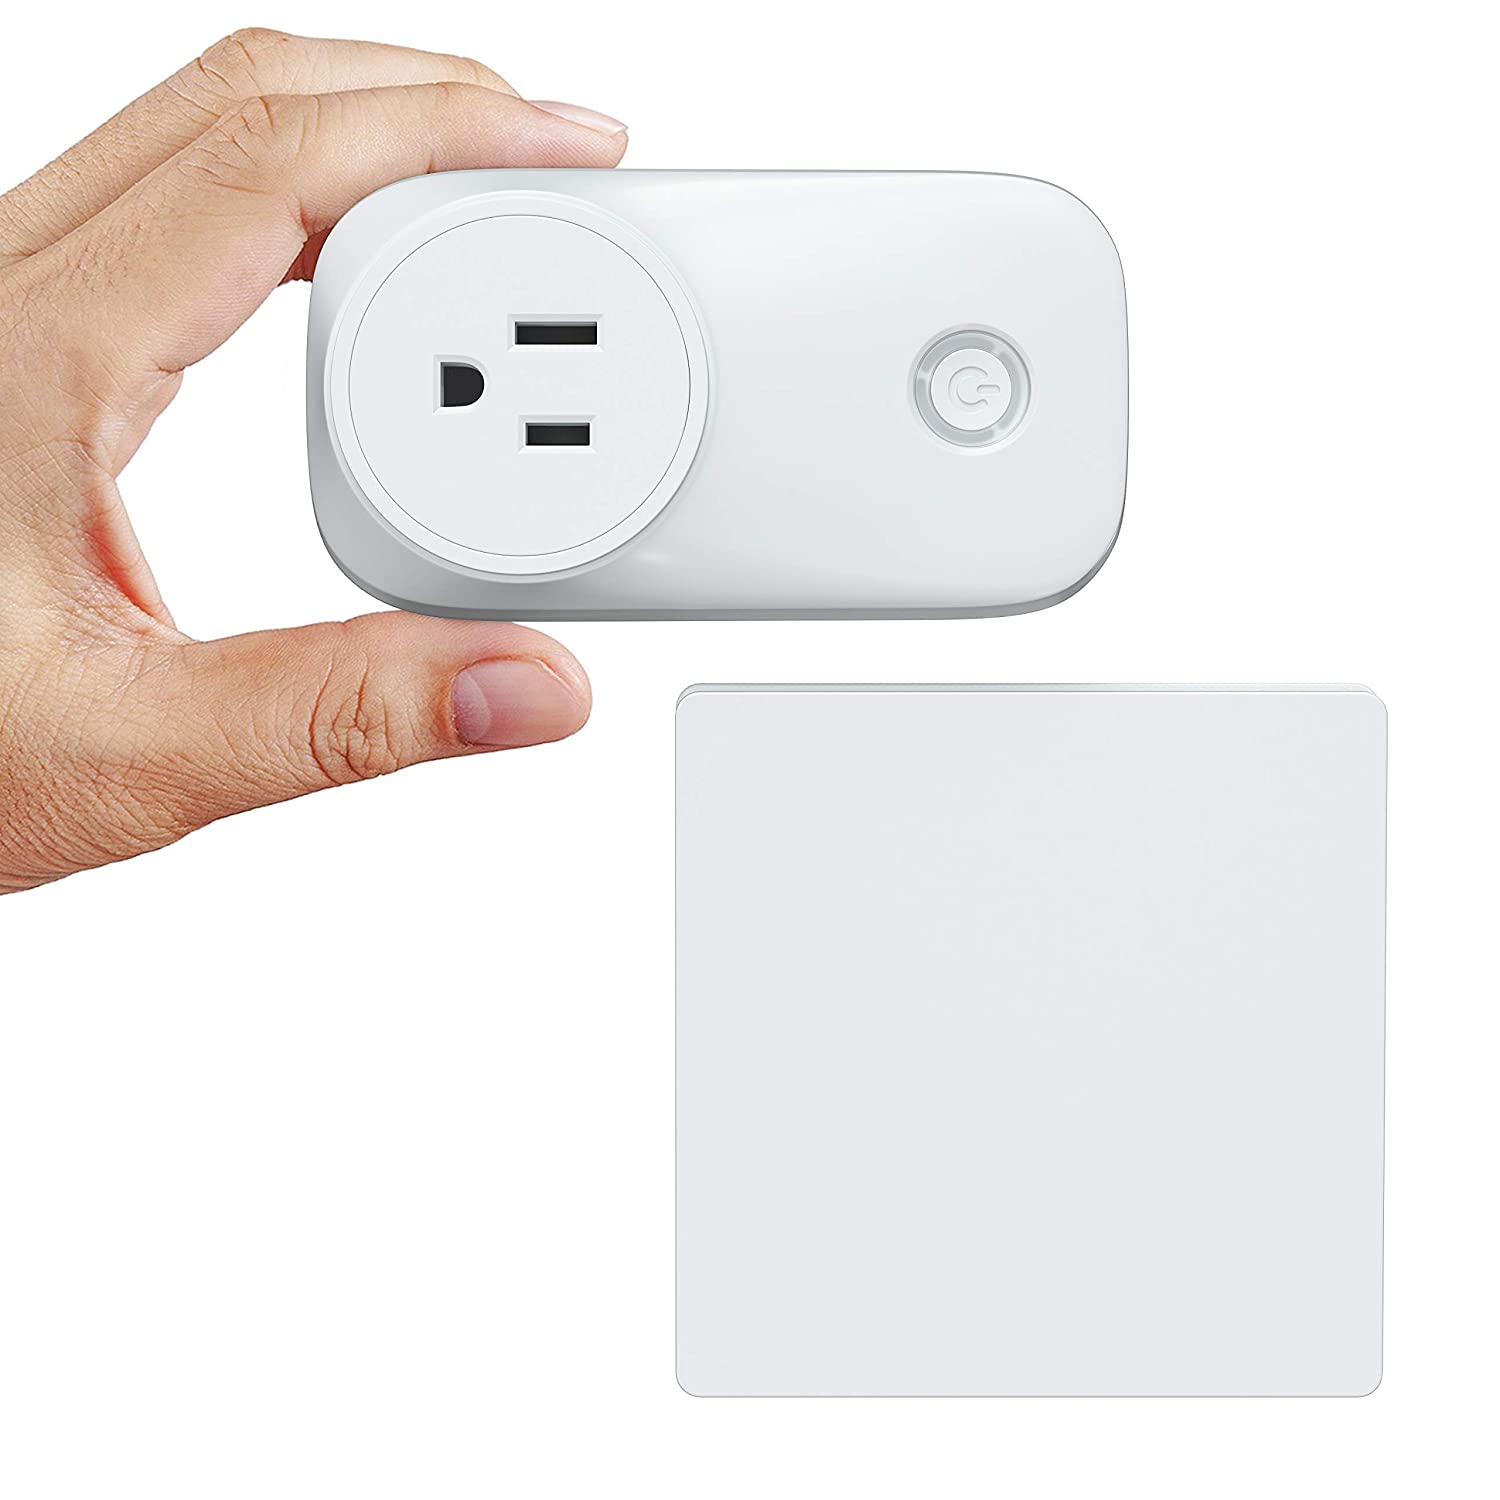 Kinetic Light Switch and Socket Cap  Kinetic Self-Powered Wireless Switches